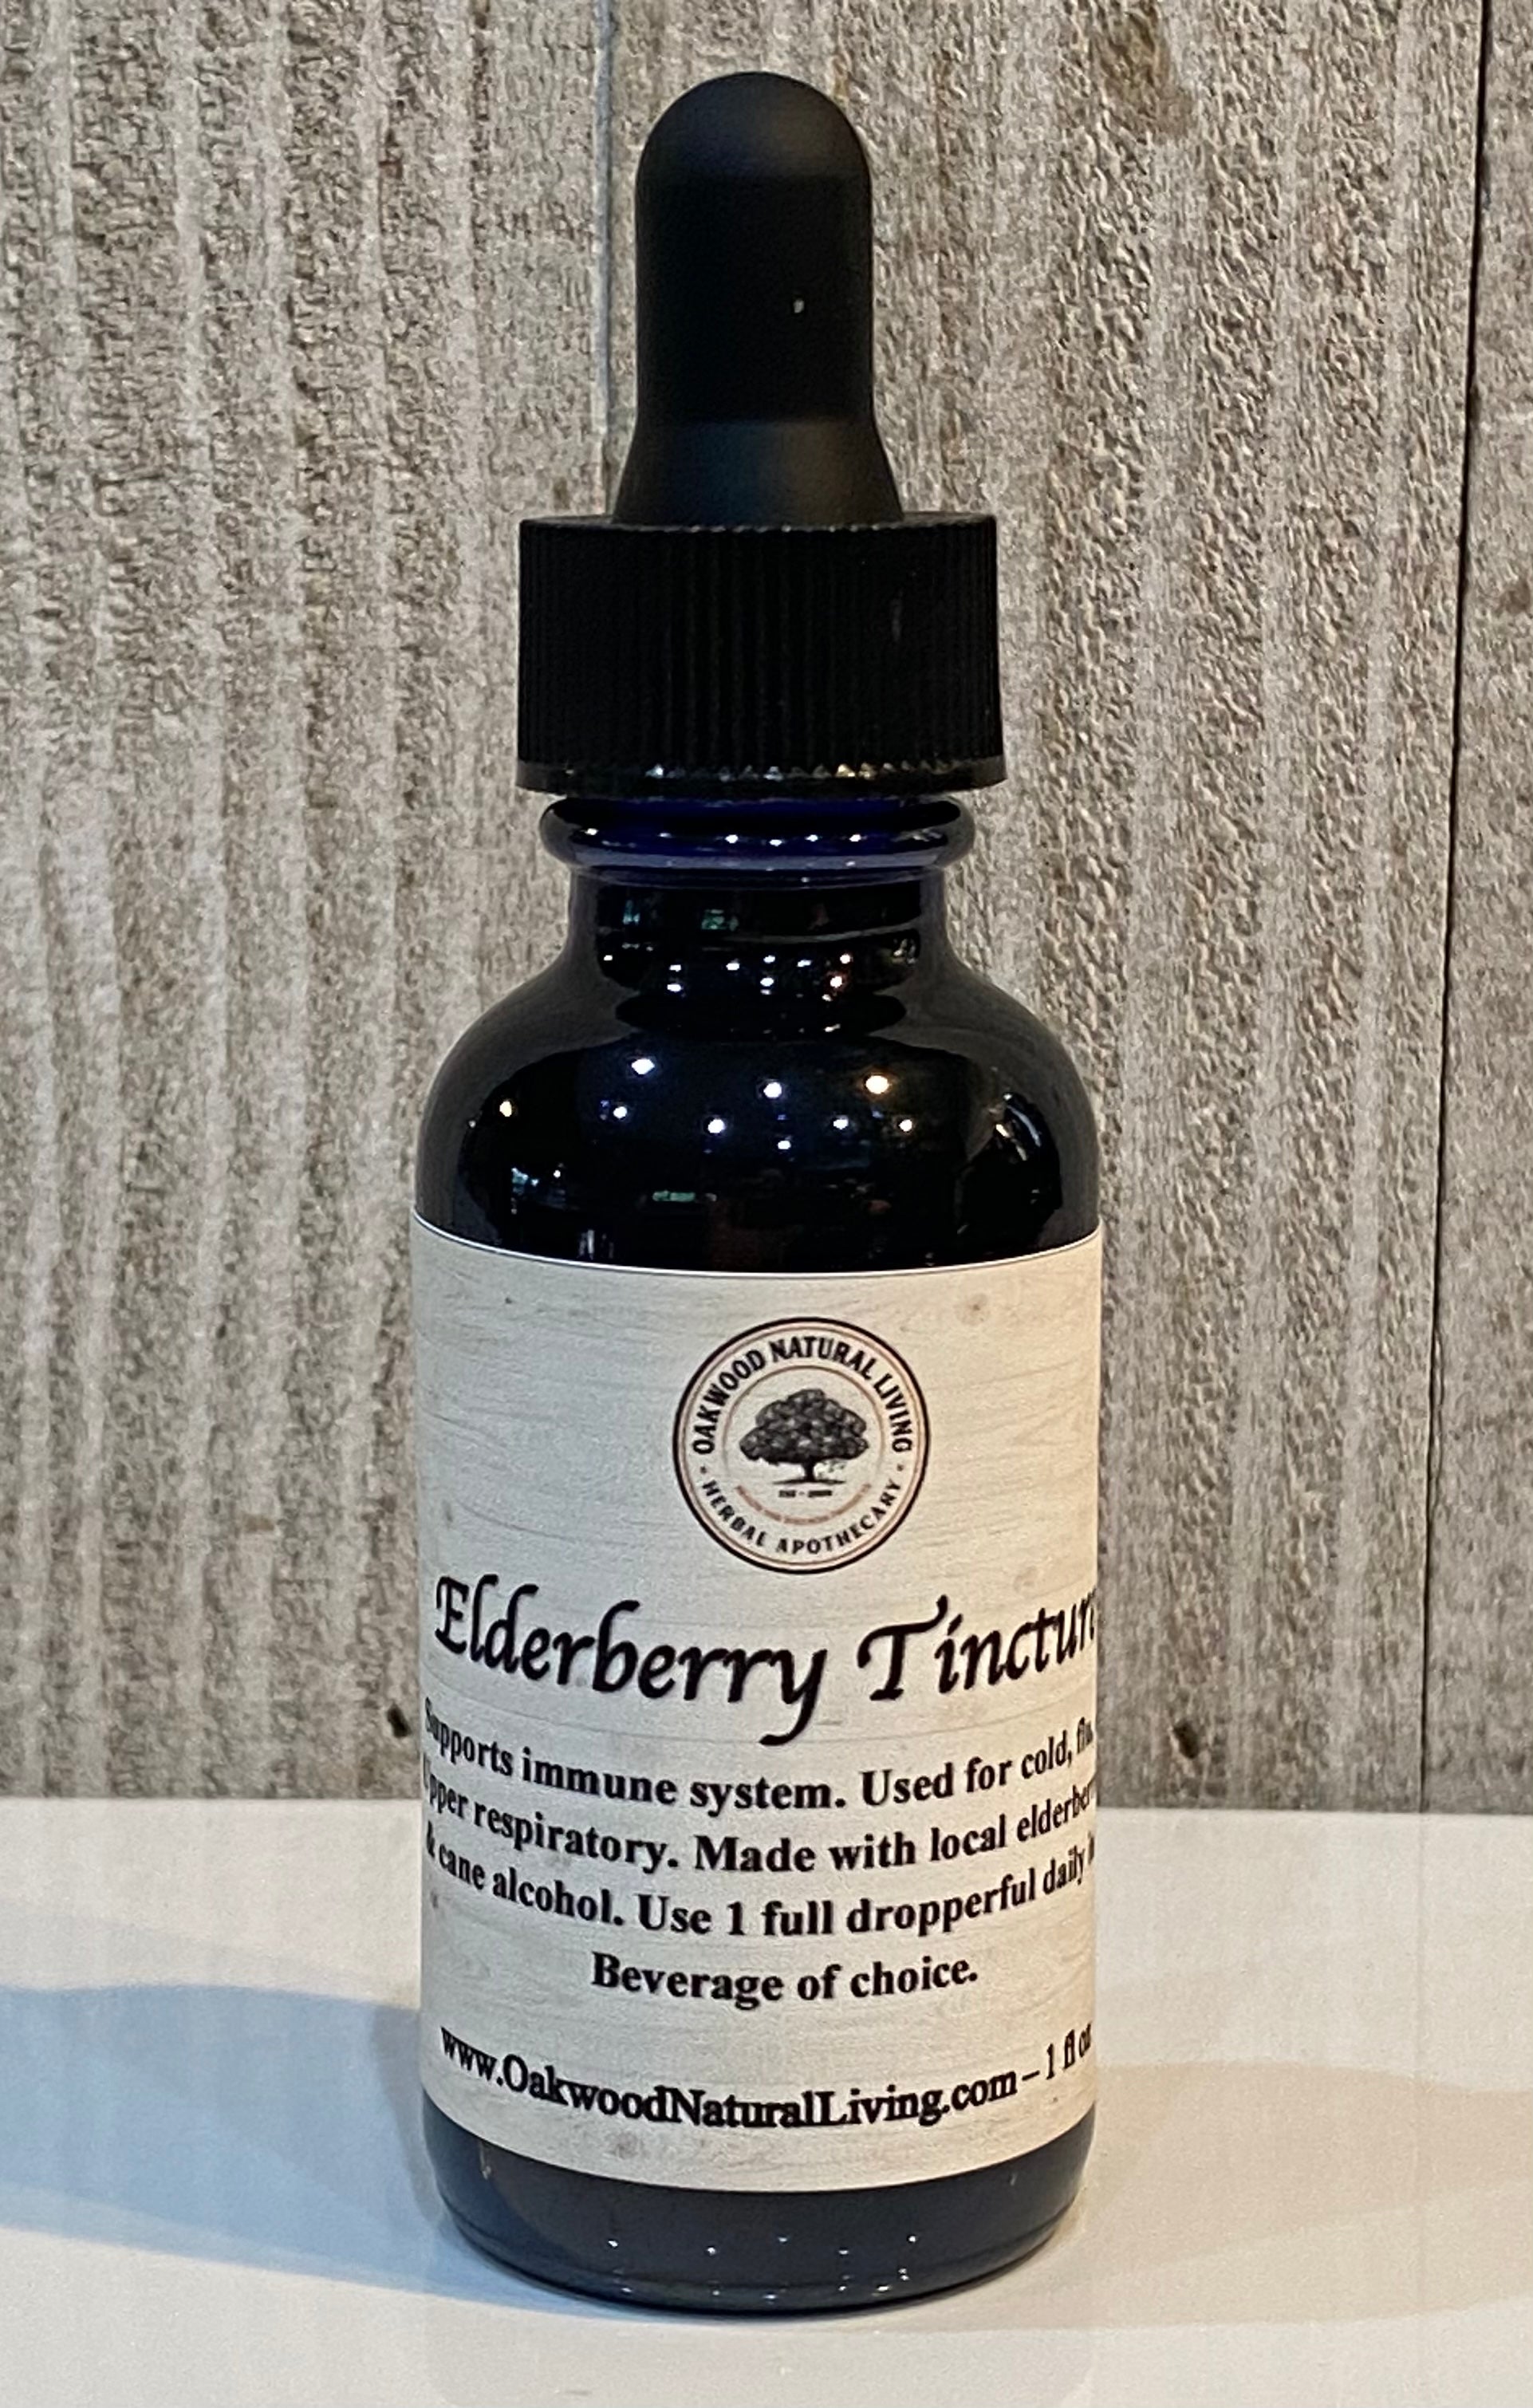 Elderberry Tincture: Boost Immunity and Fight Cold & Flu Quickly